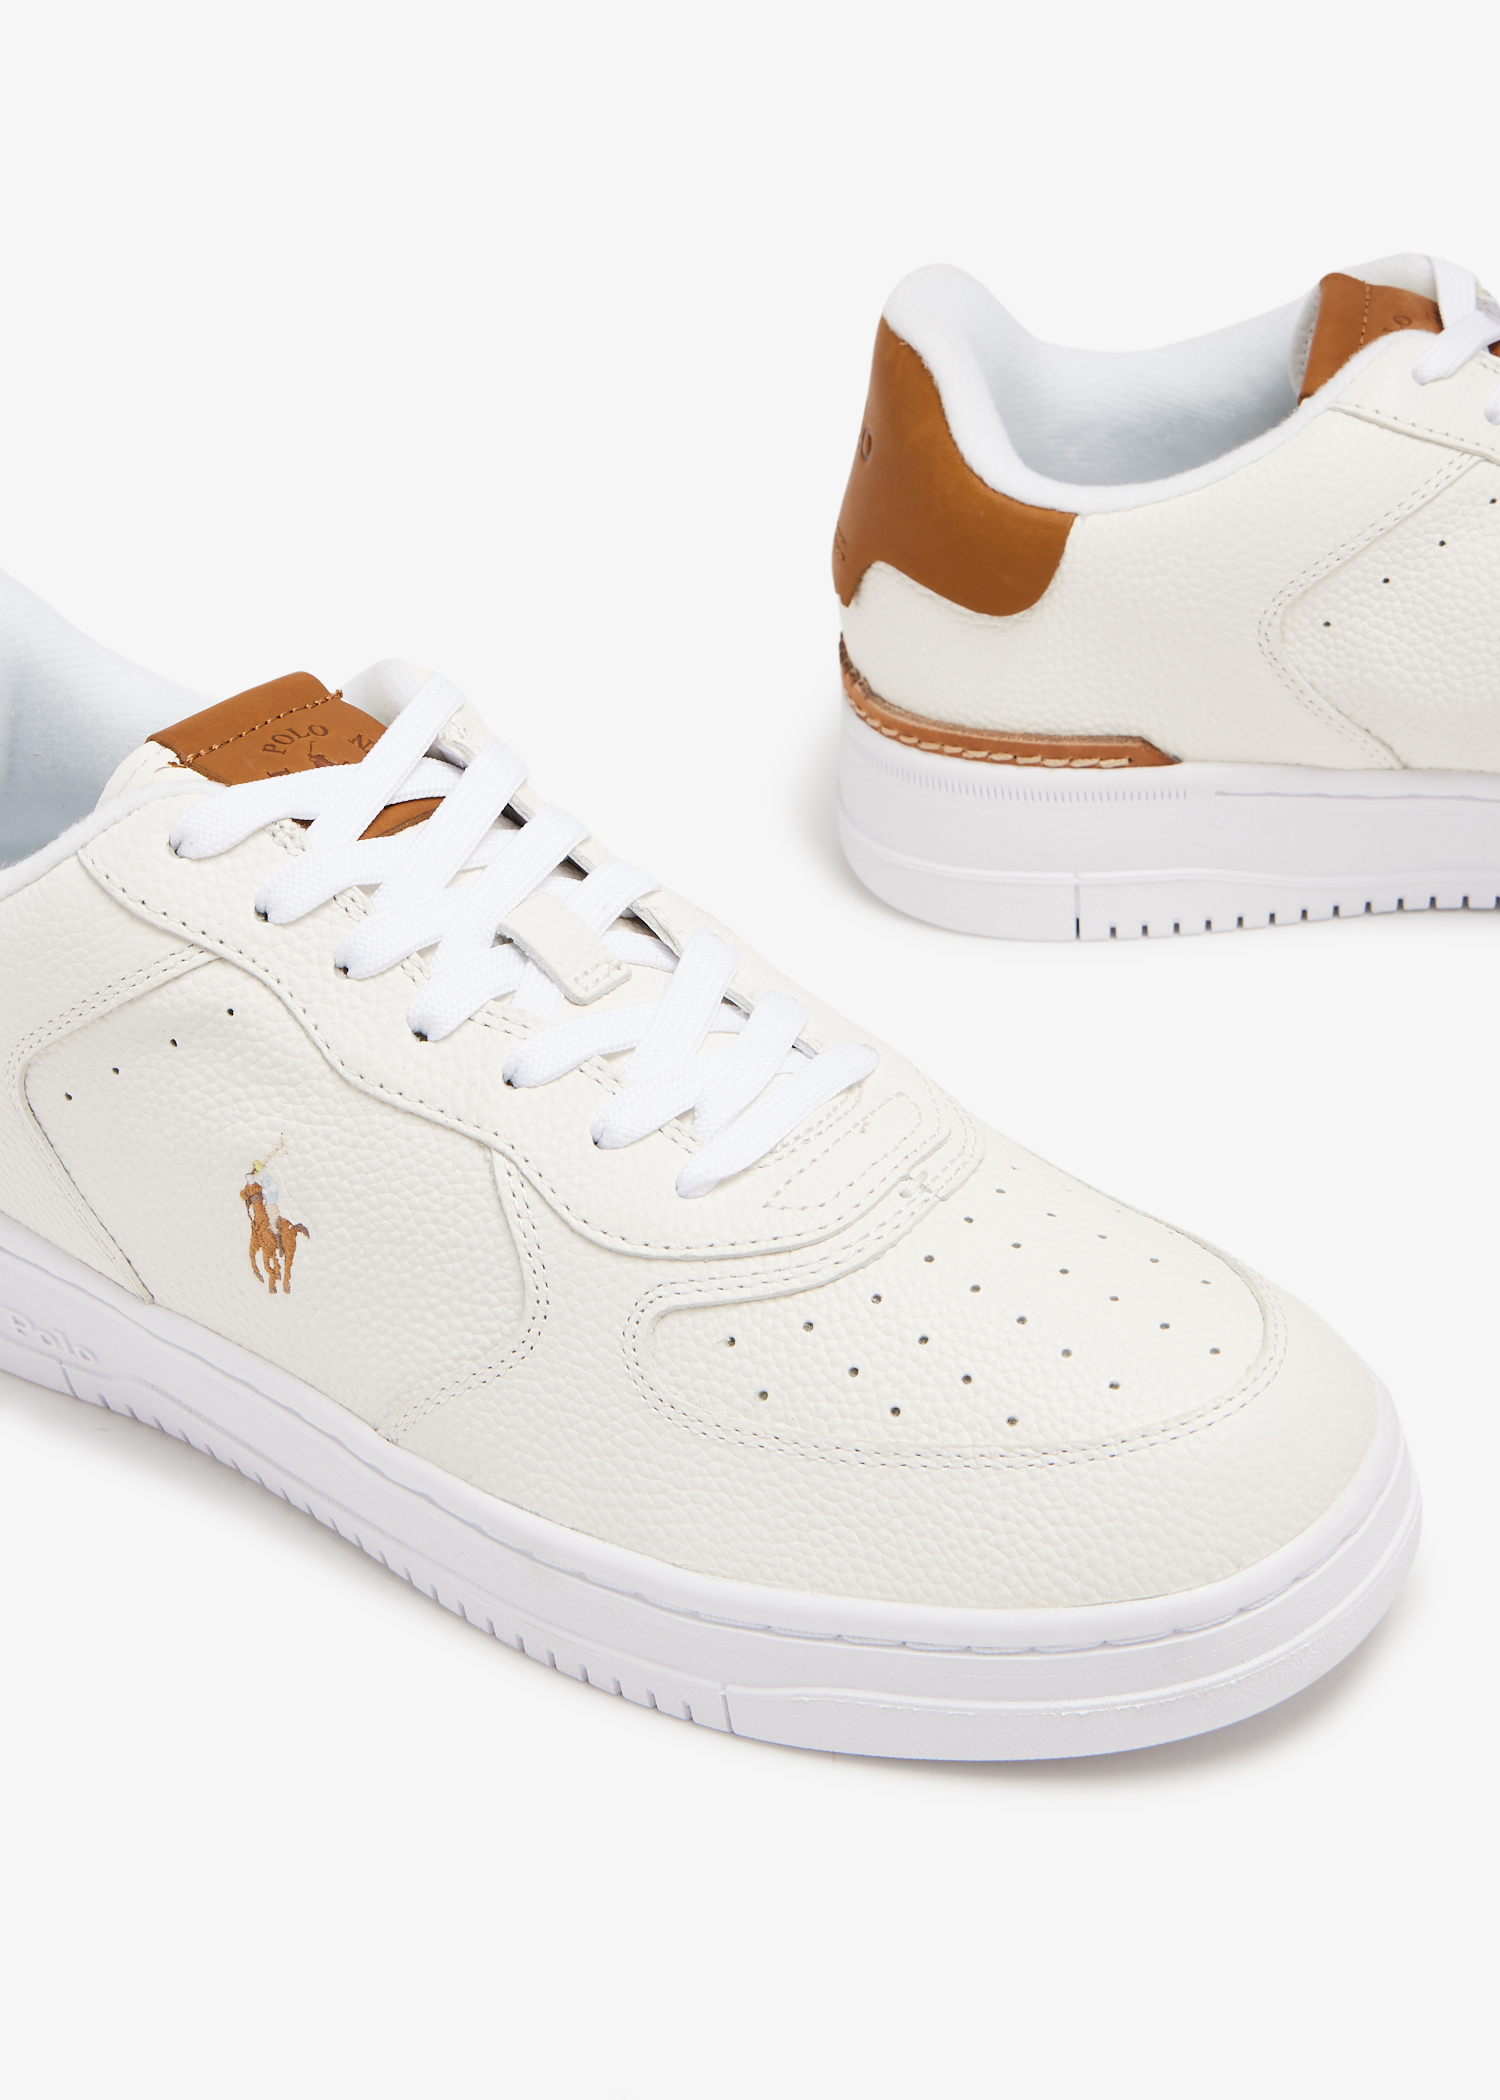 Polo Ralph Lauren Masters Court sneakers for Men - White in UAE 